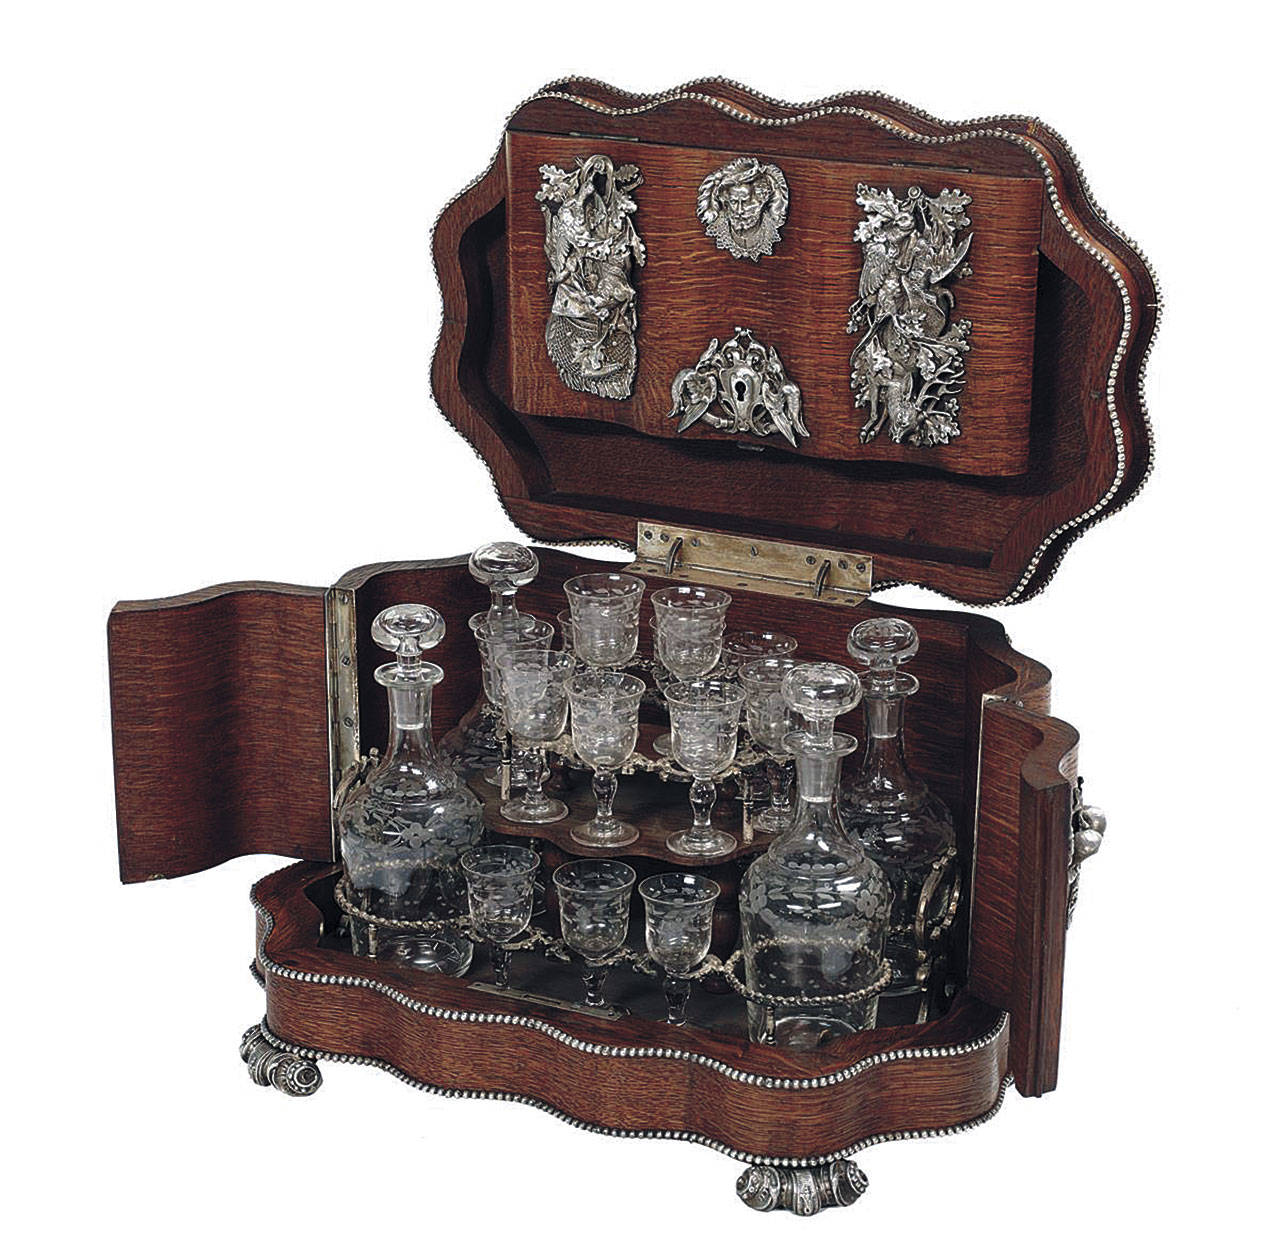 This oak 19th-century “cave a liqueur” holds four decanters and 16 liqueur glasses. It is decorated with silvered mounts of hunting dogs. The 11-inch-high box sold at New Orleans Auction Galleries for $4,250. (Cowles Syndicate Inc.)